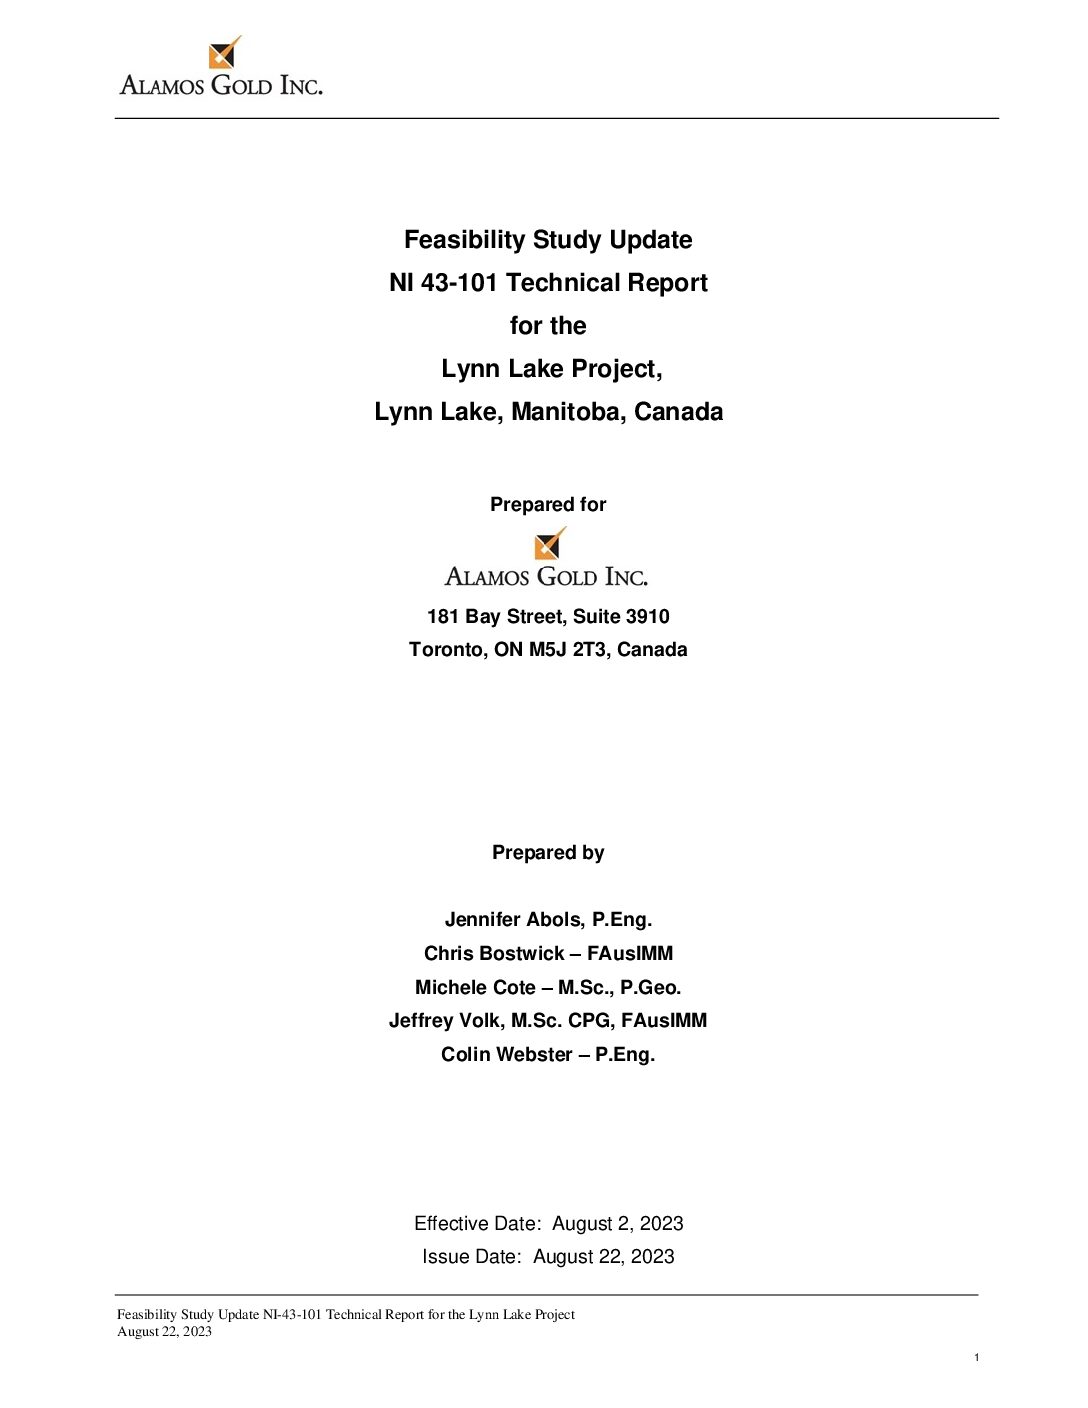 Technical Report Update 2023: Feasibility Study Update for the Lynn Lake Gold Project (PDF)